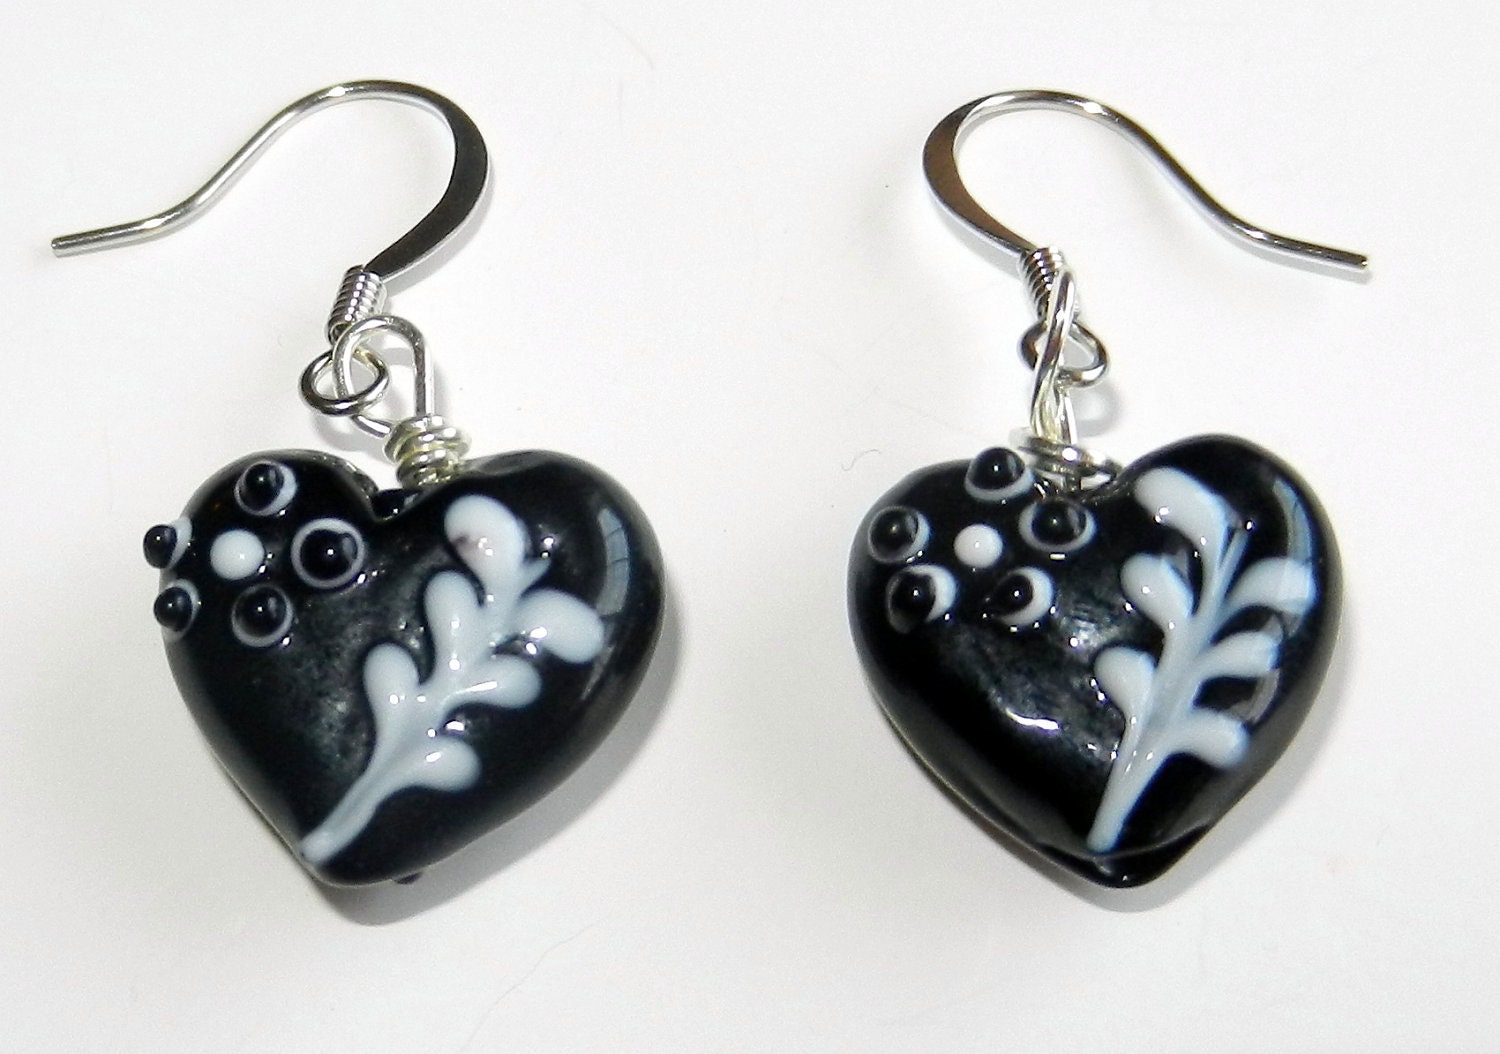 Black Heart Lampwork Beads with White Detail Earrings - CloudNineDesignz